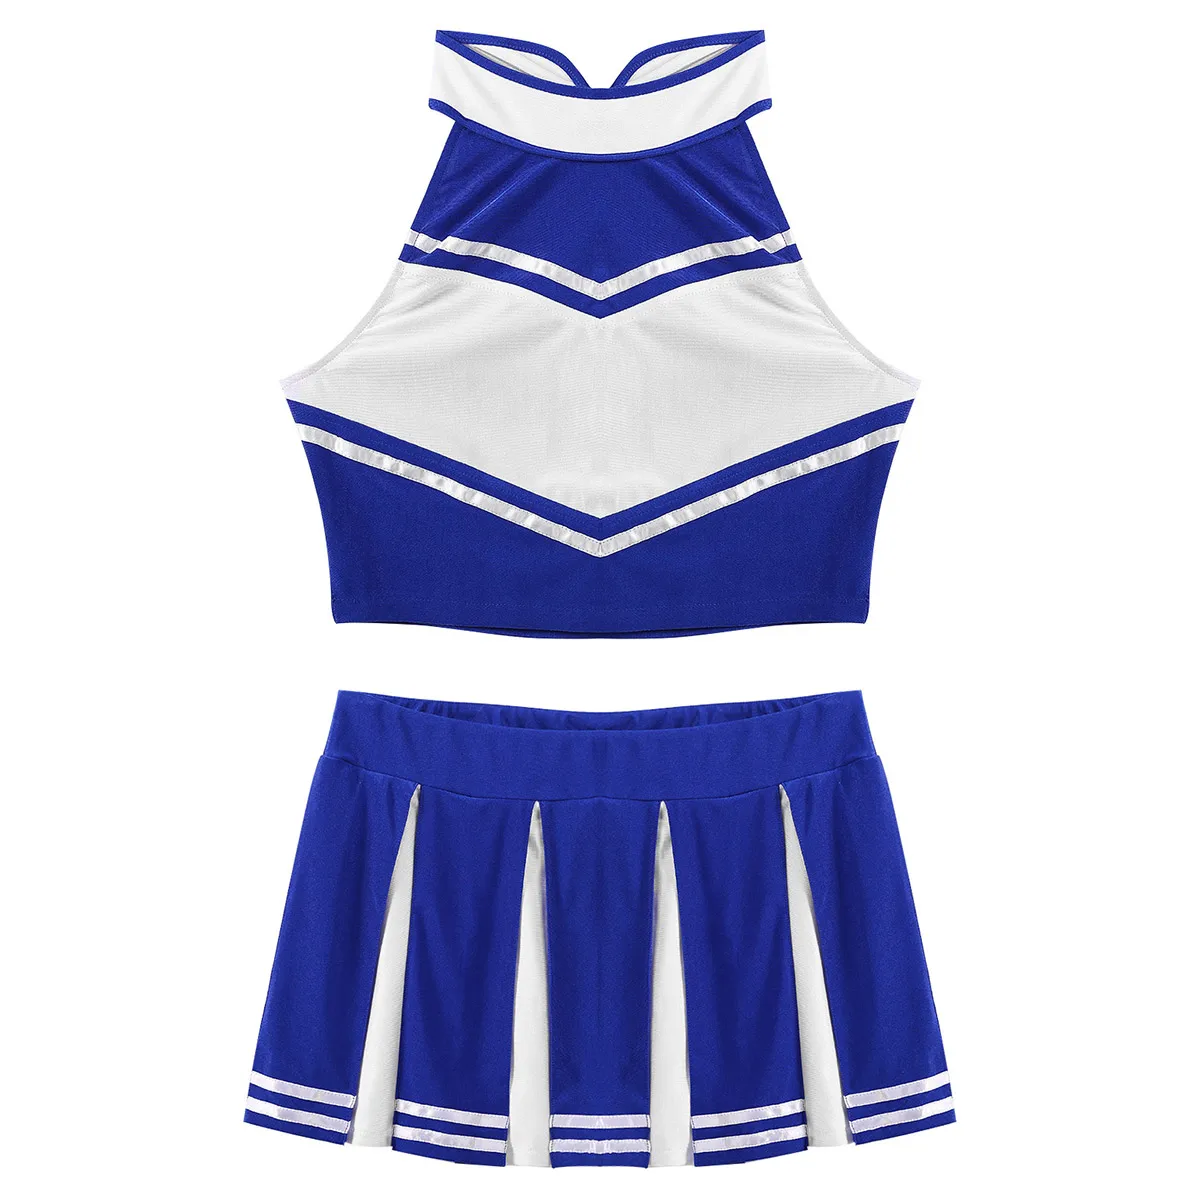 Women Cheerleading Uniform Outfit Sexy Sleeveless Crop Top With Mini ...